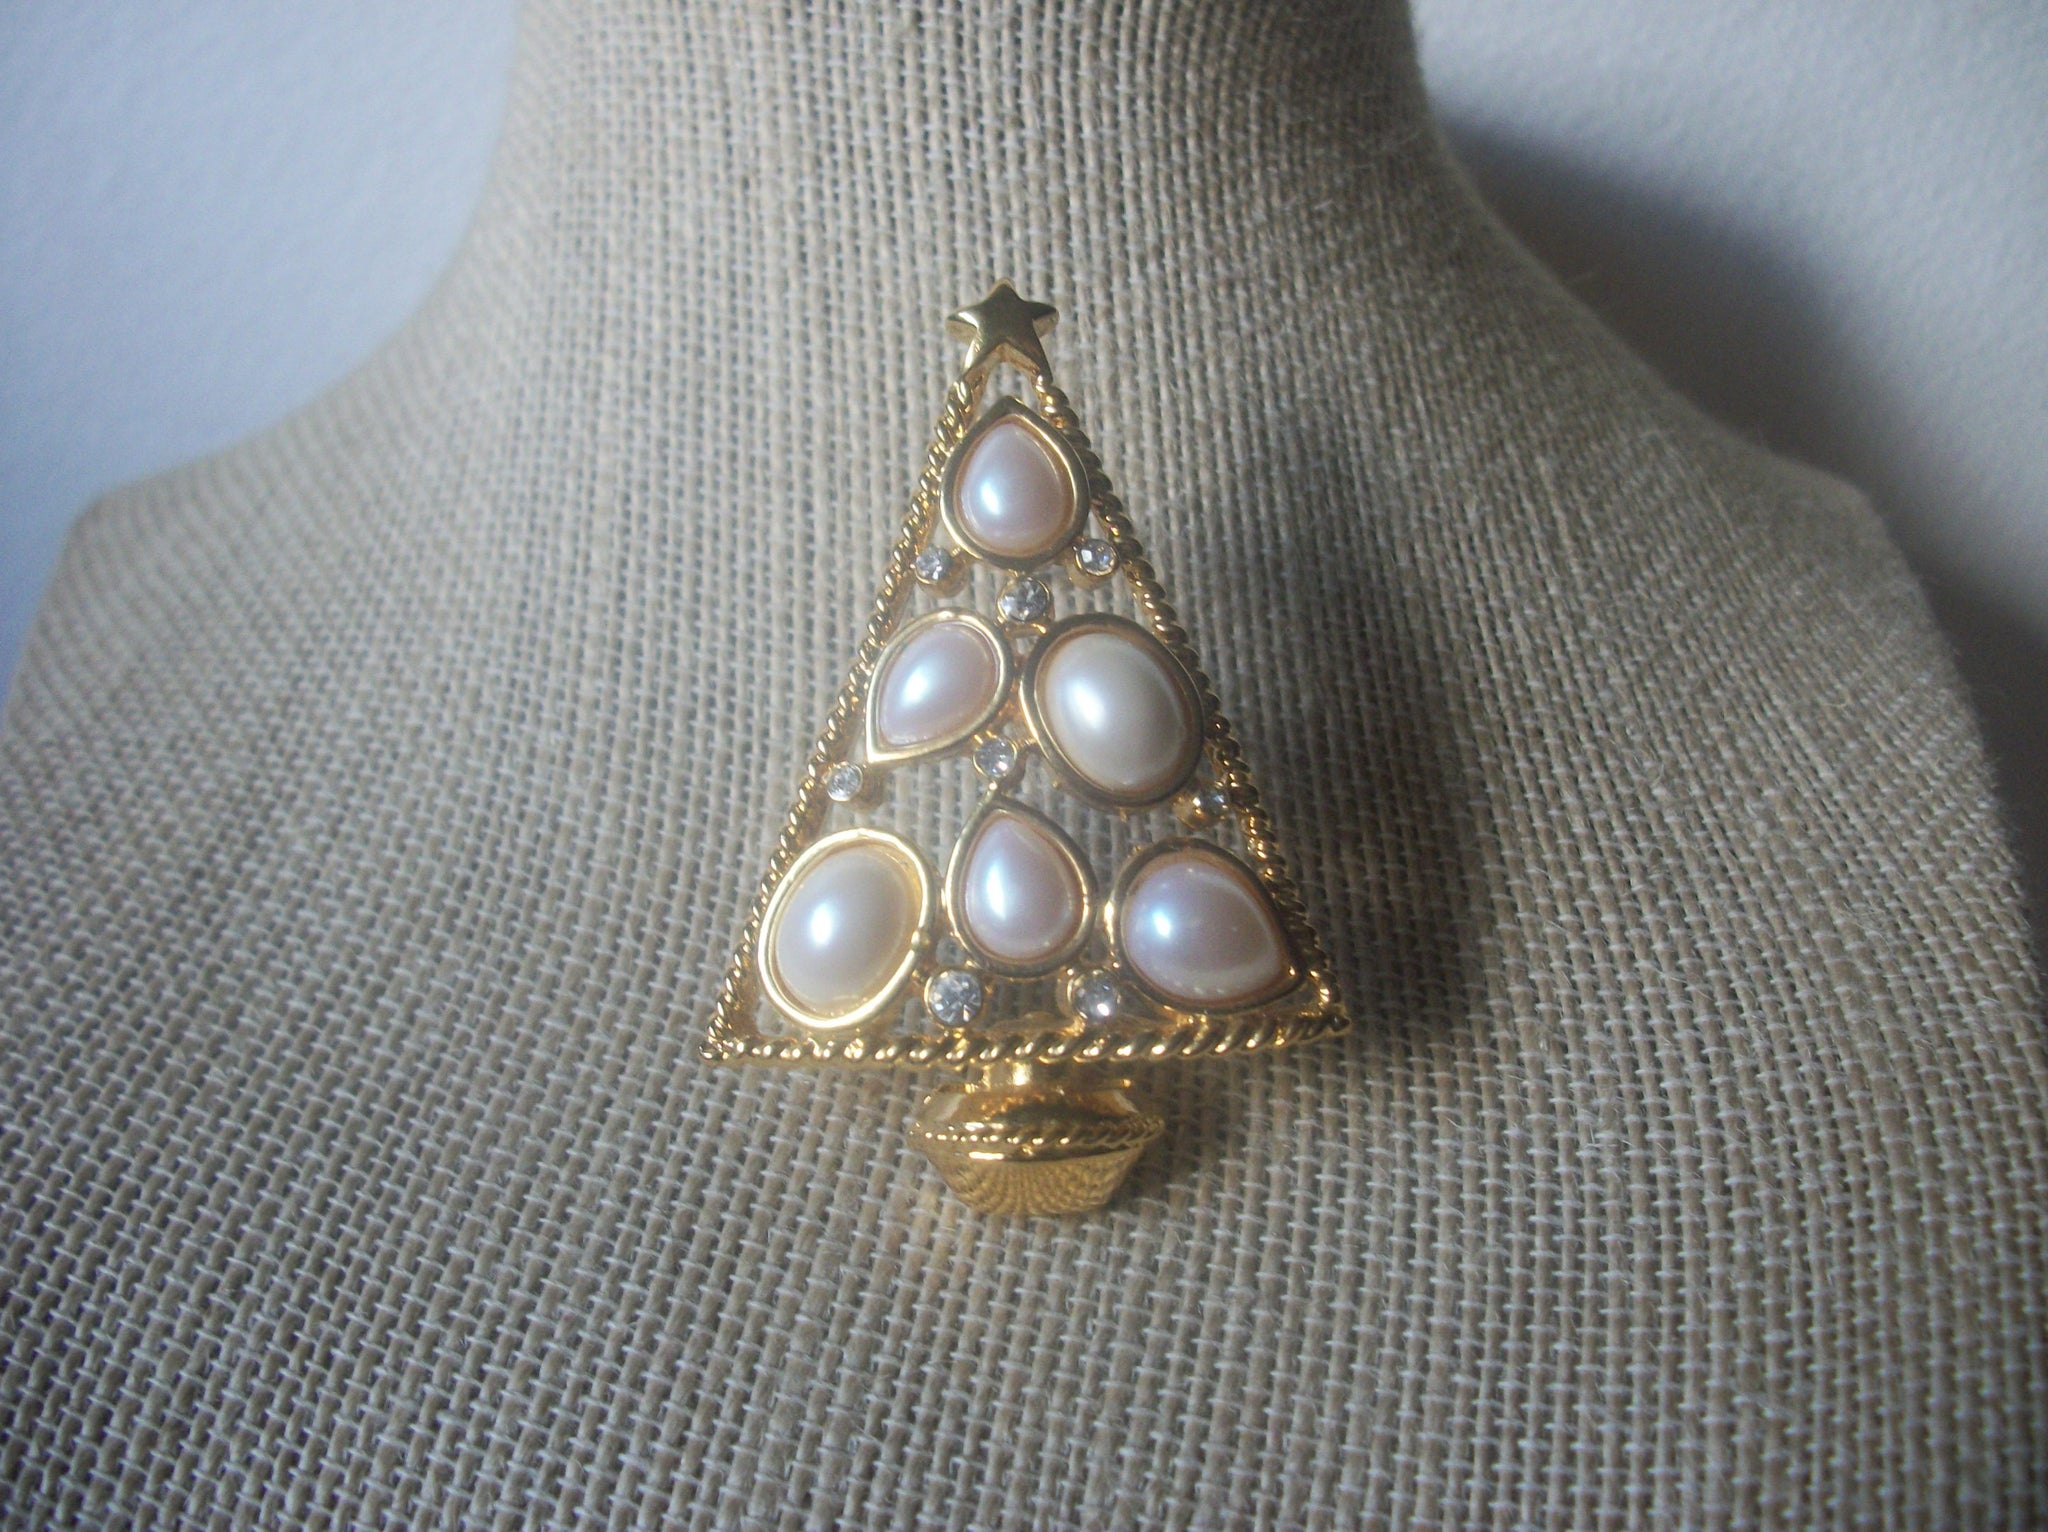 Larger Vintage Jewelry Christmas Tree, White Faux Pearls, Clear Crystals, Gold Tone, Brooch Pin 53018